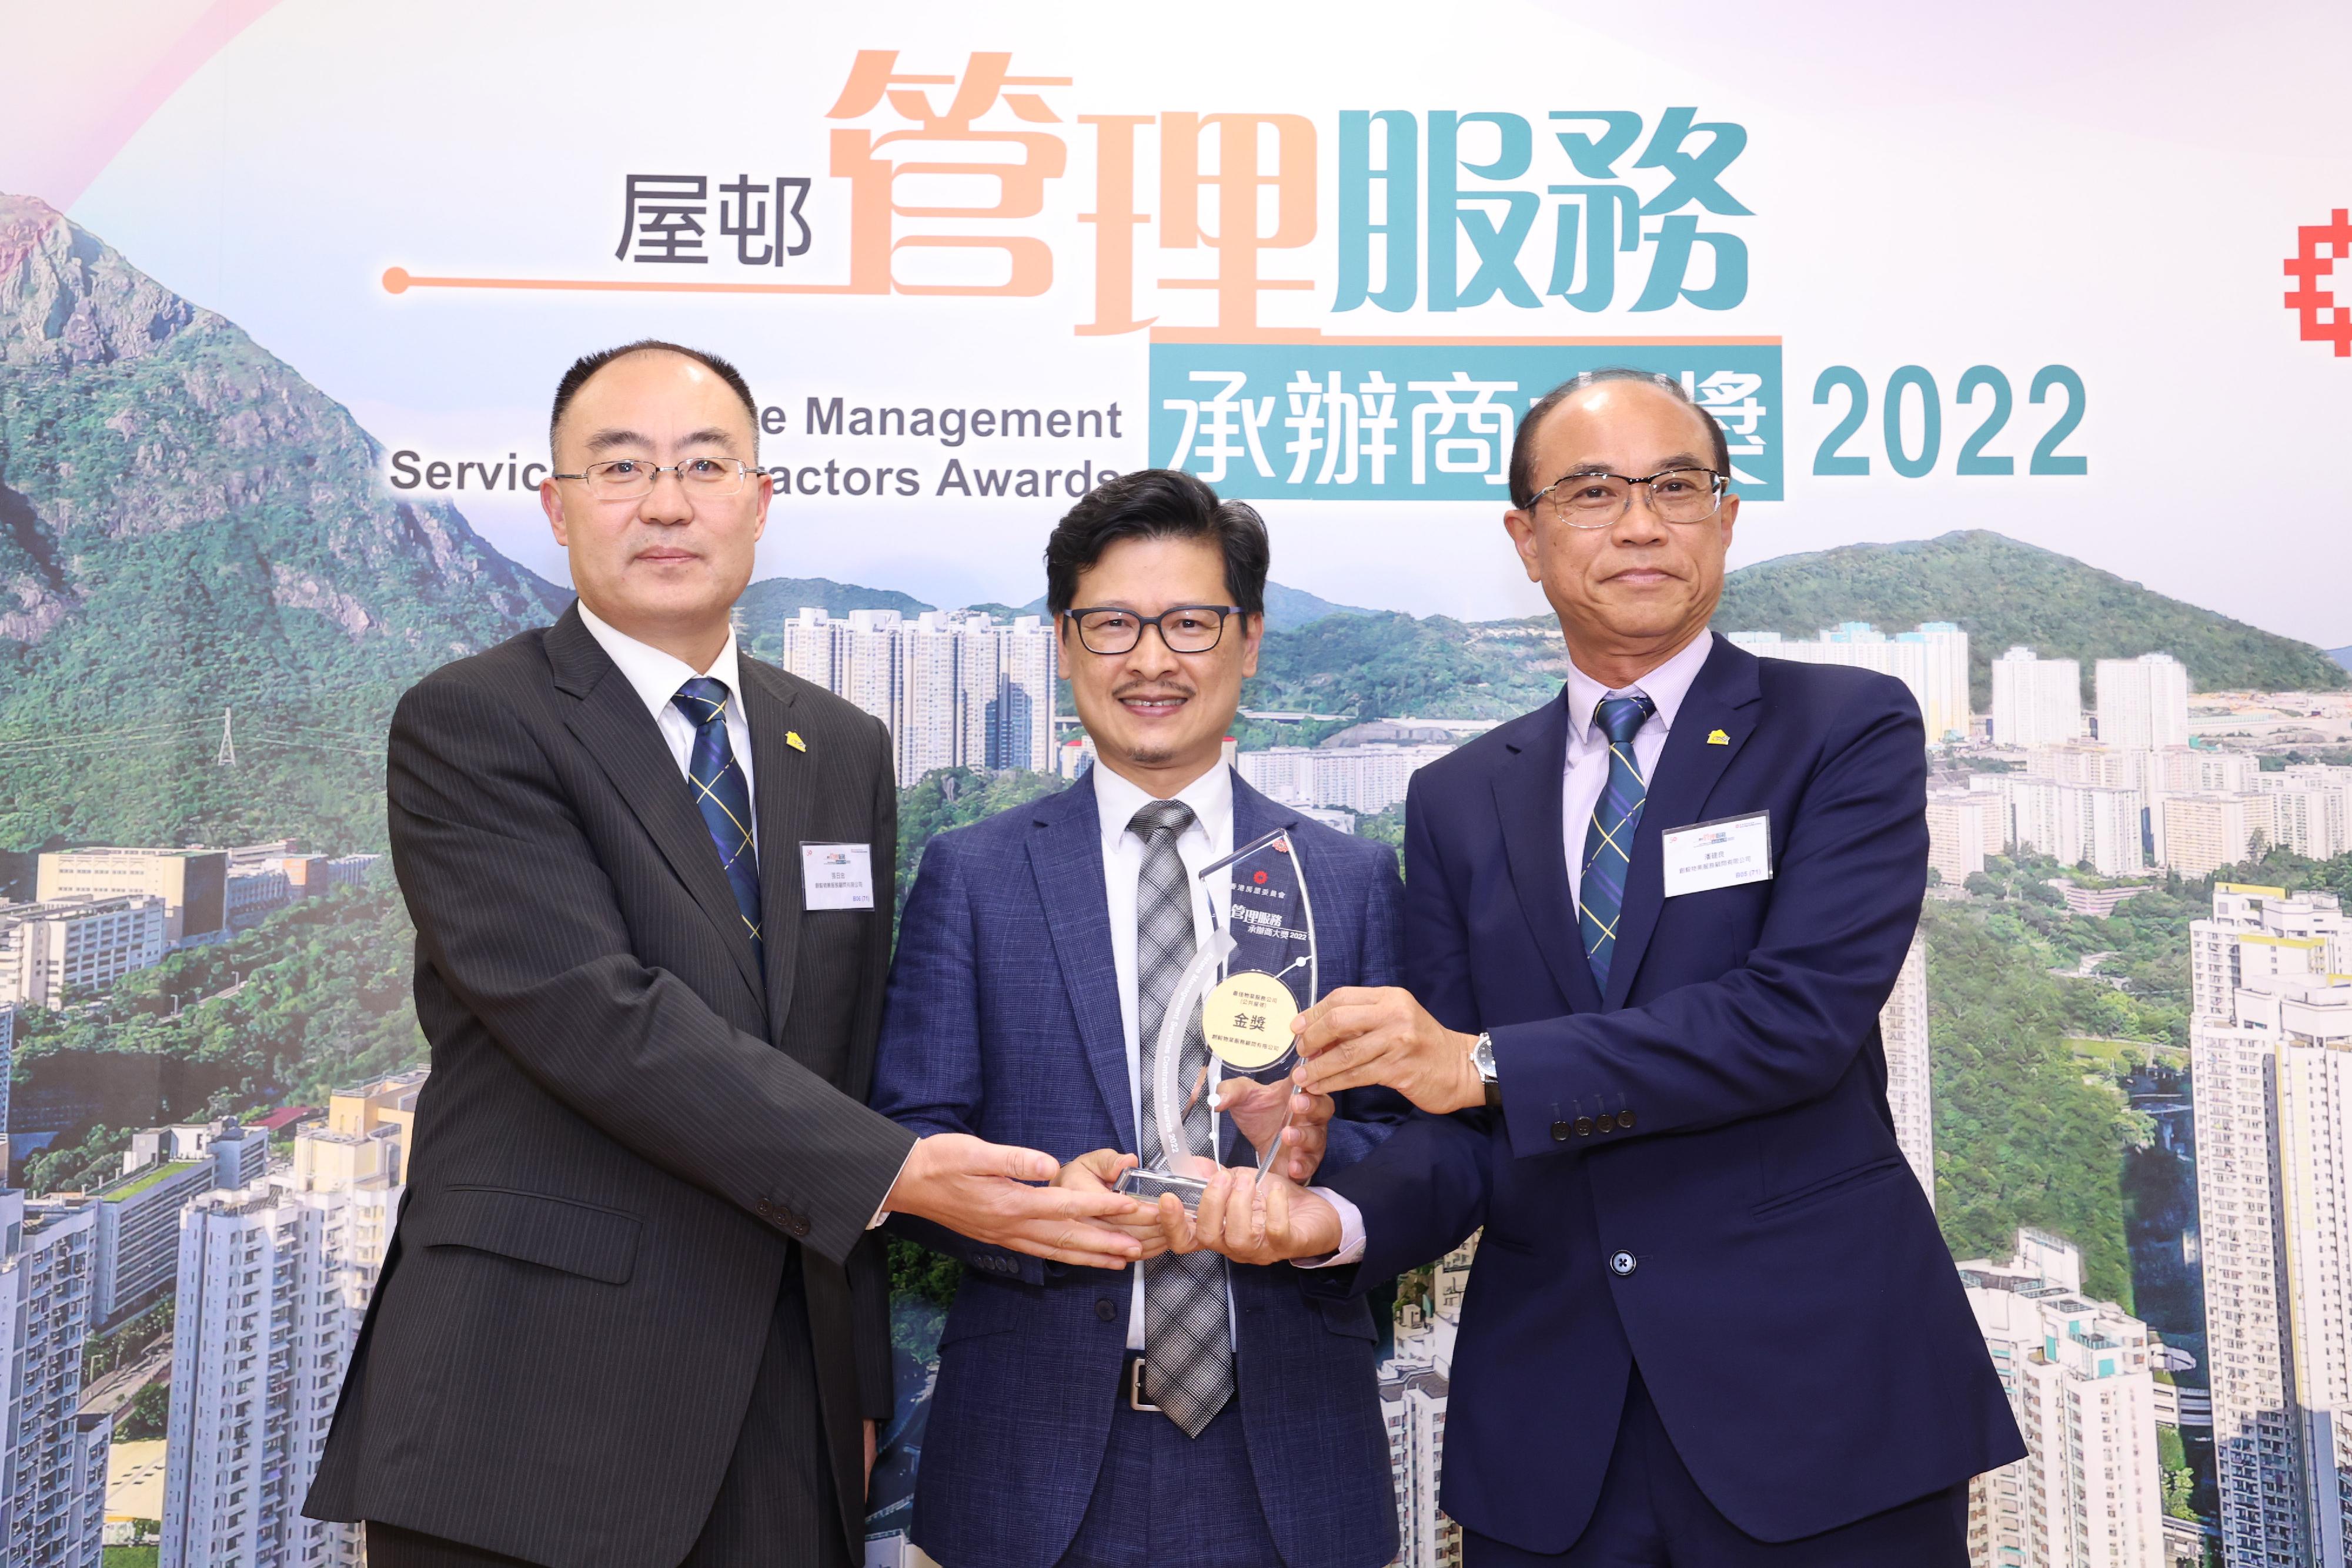 The Hong Kong Housing Authority (HA) hosted the Estate Management Services Contractors Awards 2022 presentation ceremony at the HA Headquarters in Ho Man Tin today (March 22). Photo shows the Deputy Director of Housing (Estate Management), Mr Ricky Yeung (centre), and representatives of the winner of Gold Award of Best Property Services Agent (Public Rental Housing).